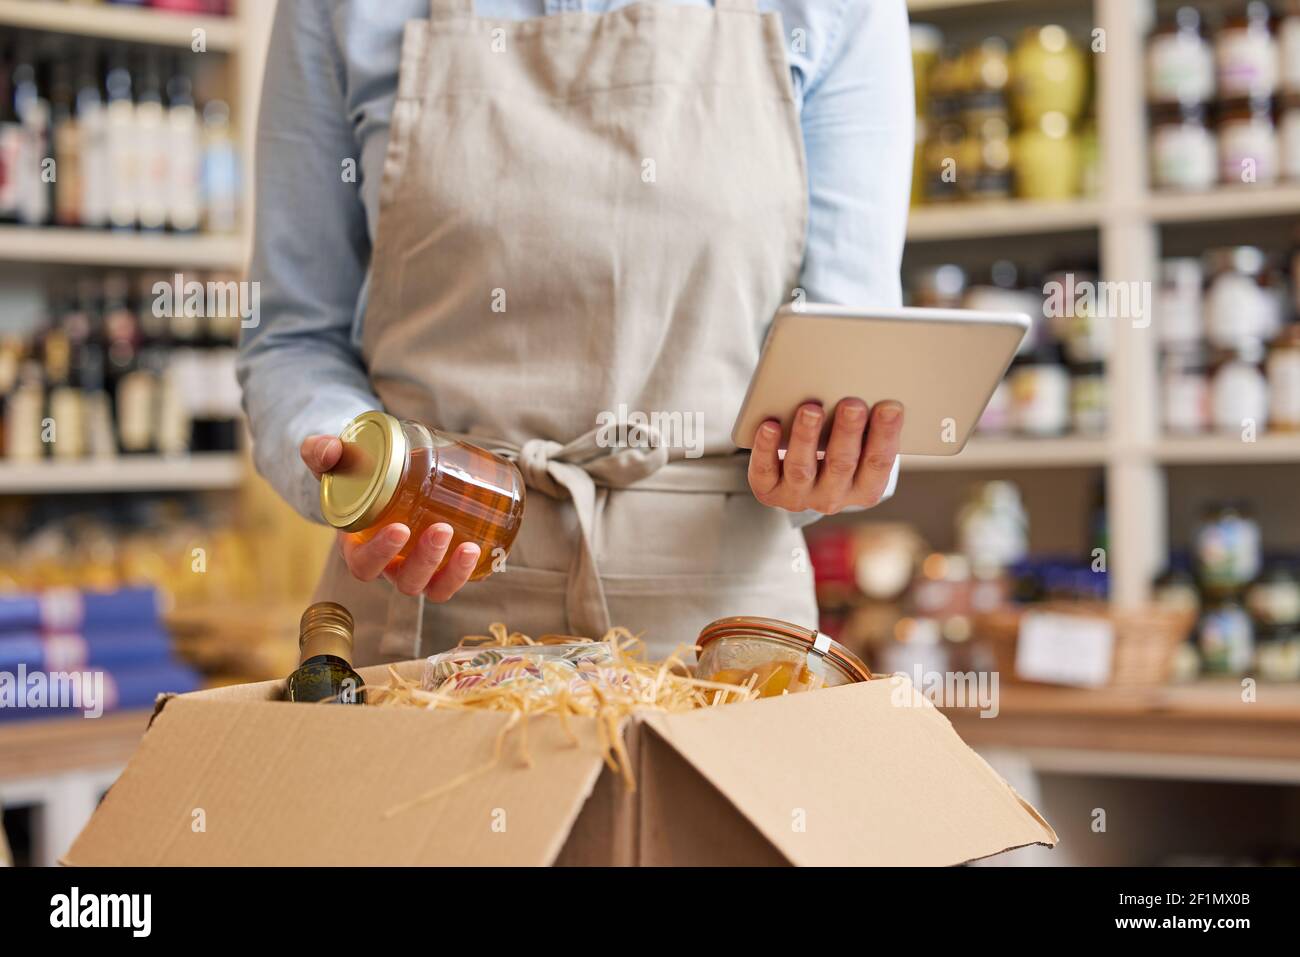 Close Up Of Female Owner Of Delicatessen Food Shop With Digital Tablet Preparing Online Grocery Order Stock Photo